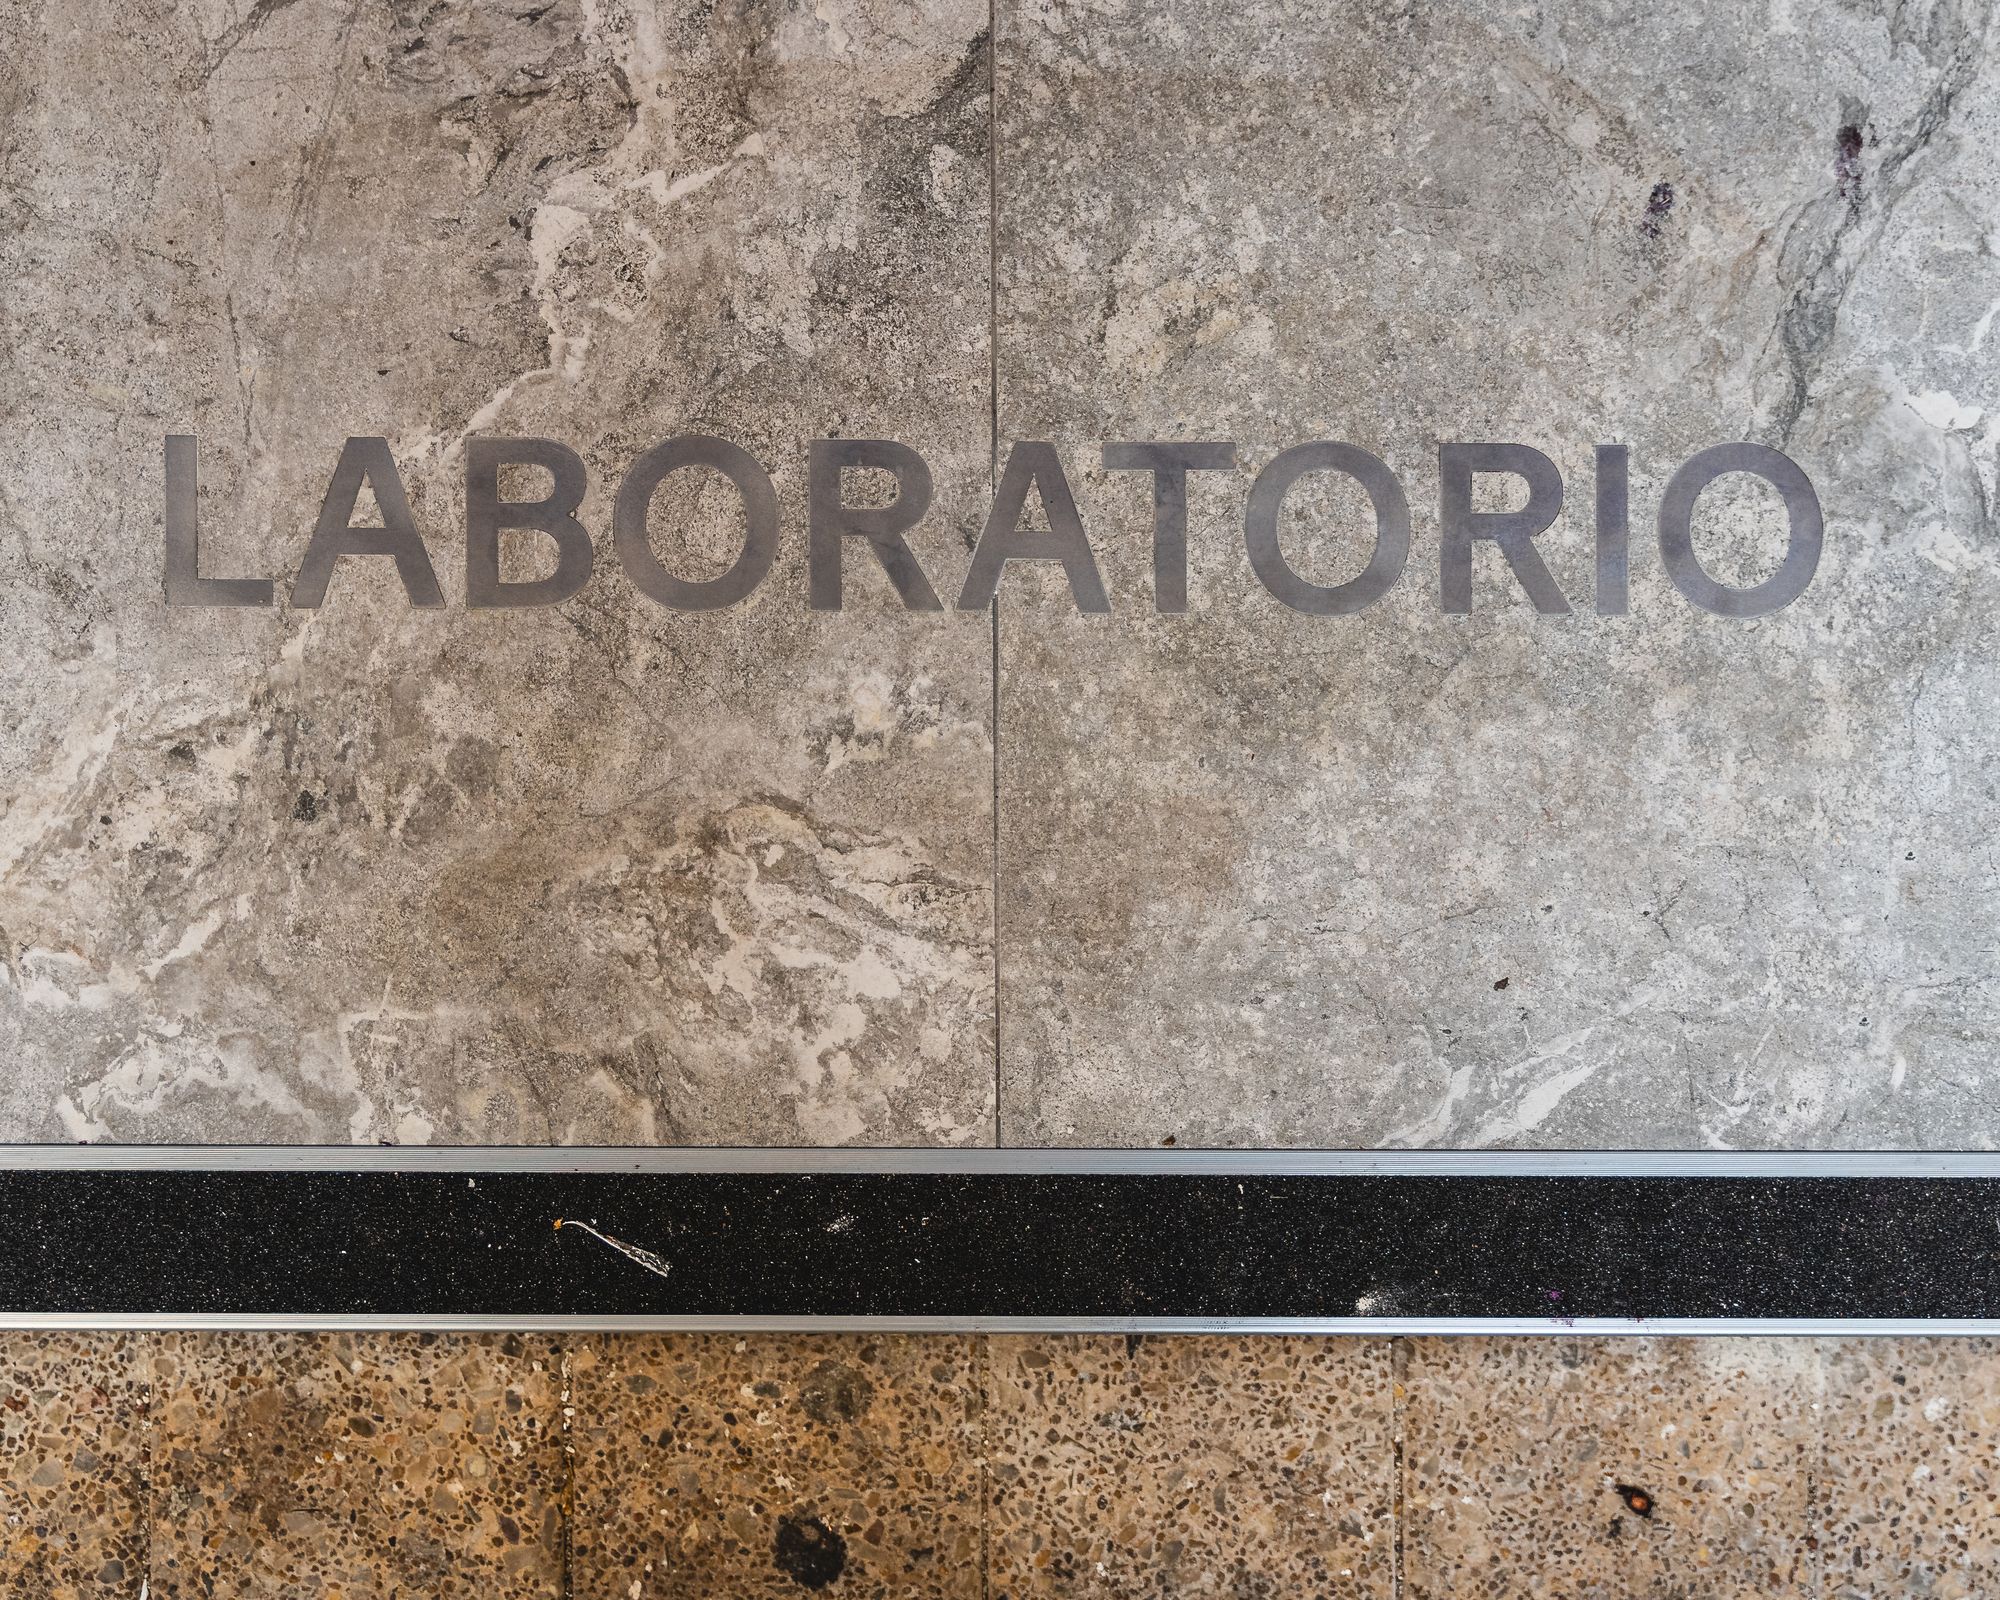 Tiled floor with the word laboratorio printied in it